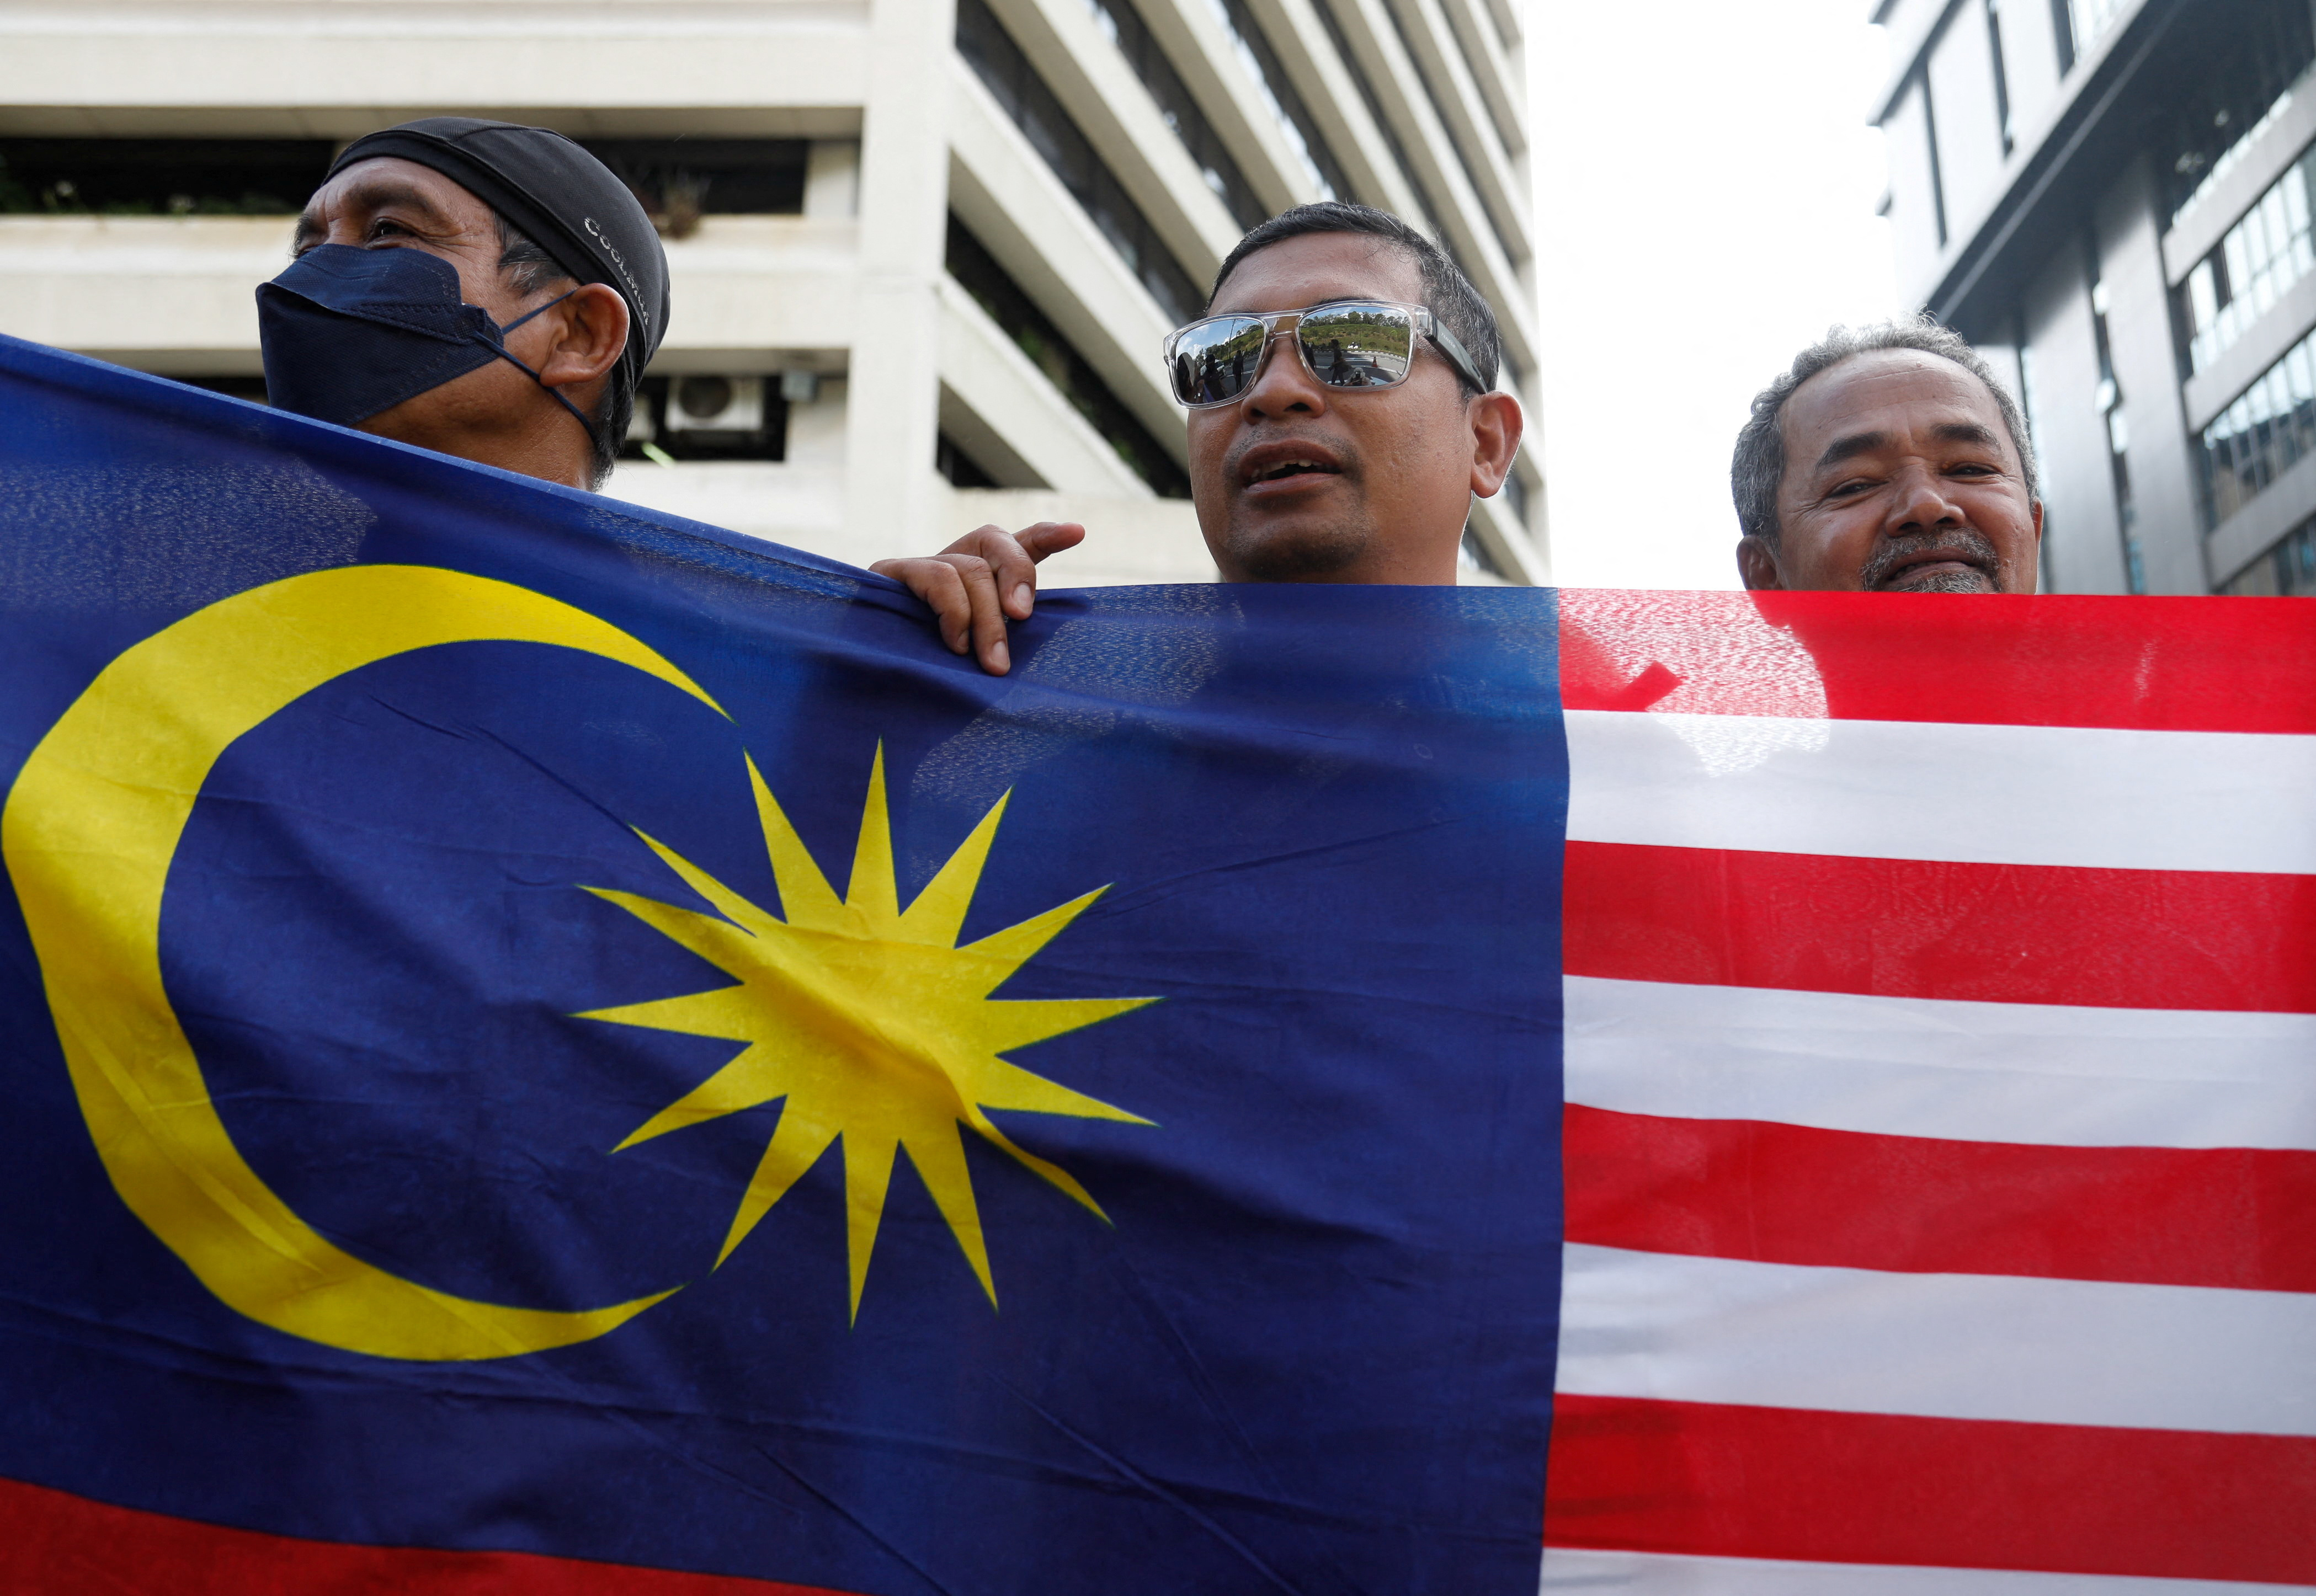 Supporters of Anwar Ibrahim hold the Malaysian flag as they celebrate Anwar's swearing in as prime minister in front of the National Palace in Kuala Lumpur, Malaysia November 24, 2022. REUTERS/Hasnoor Hussain/Pool